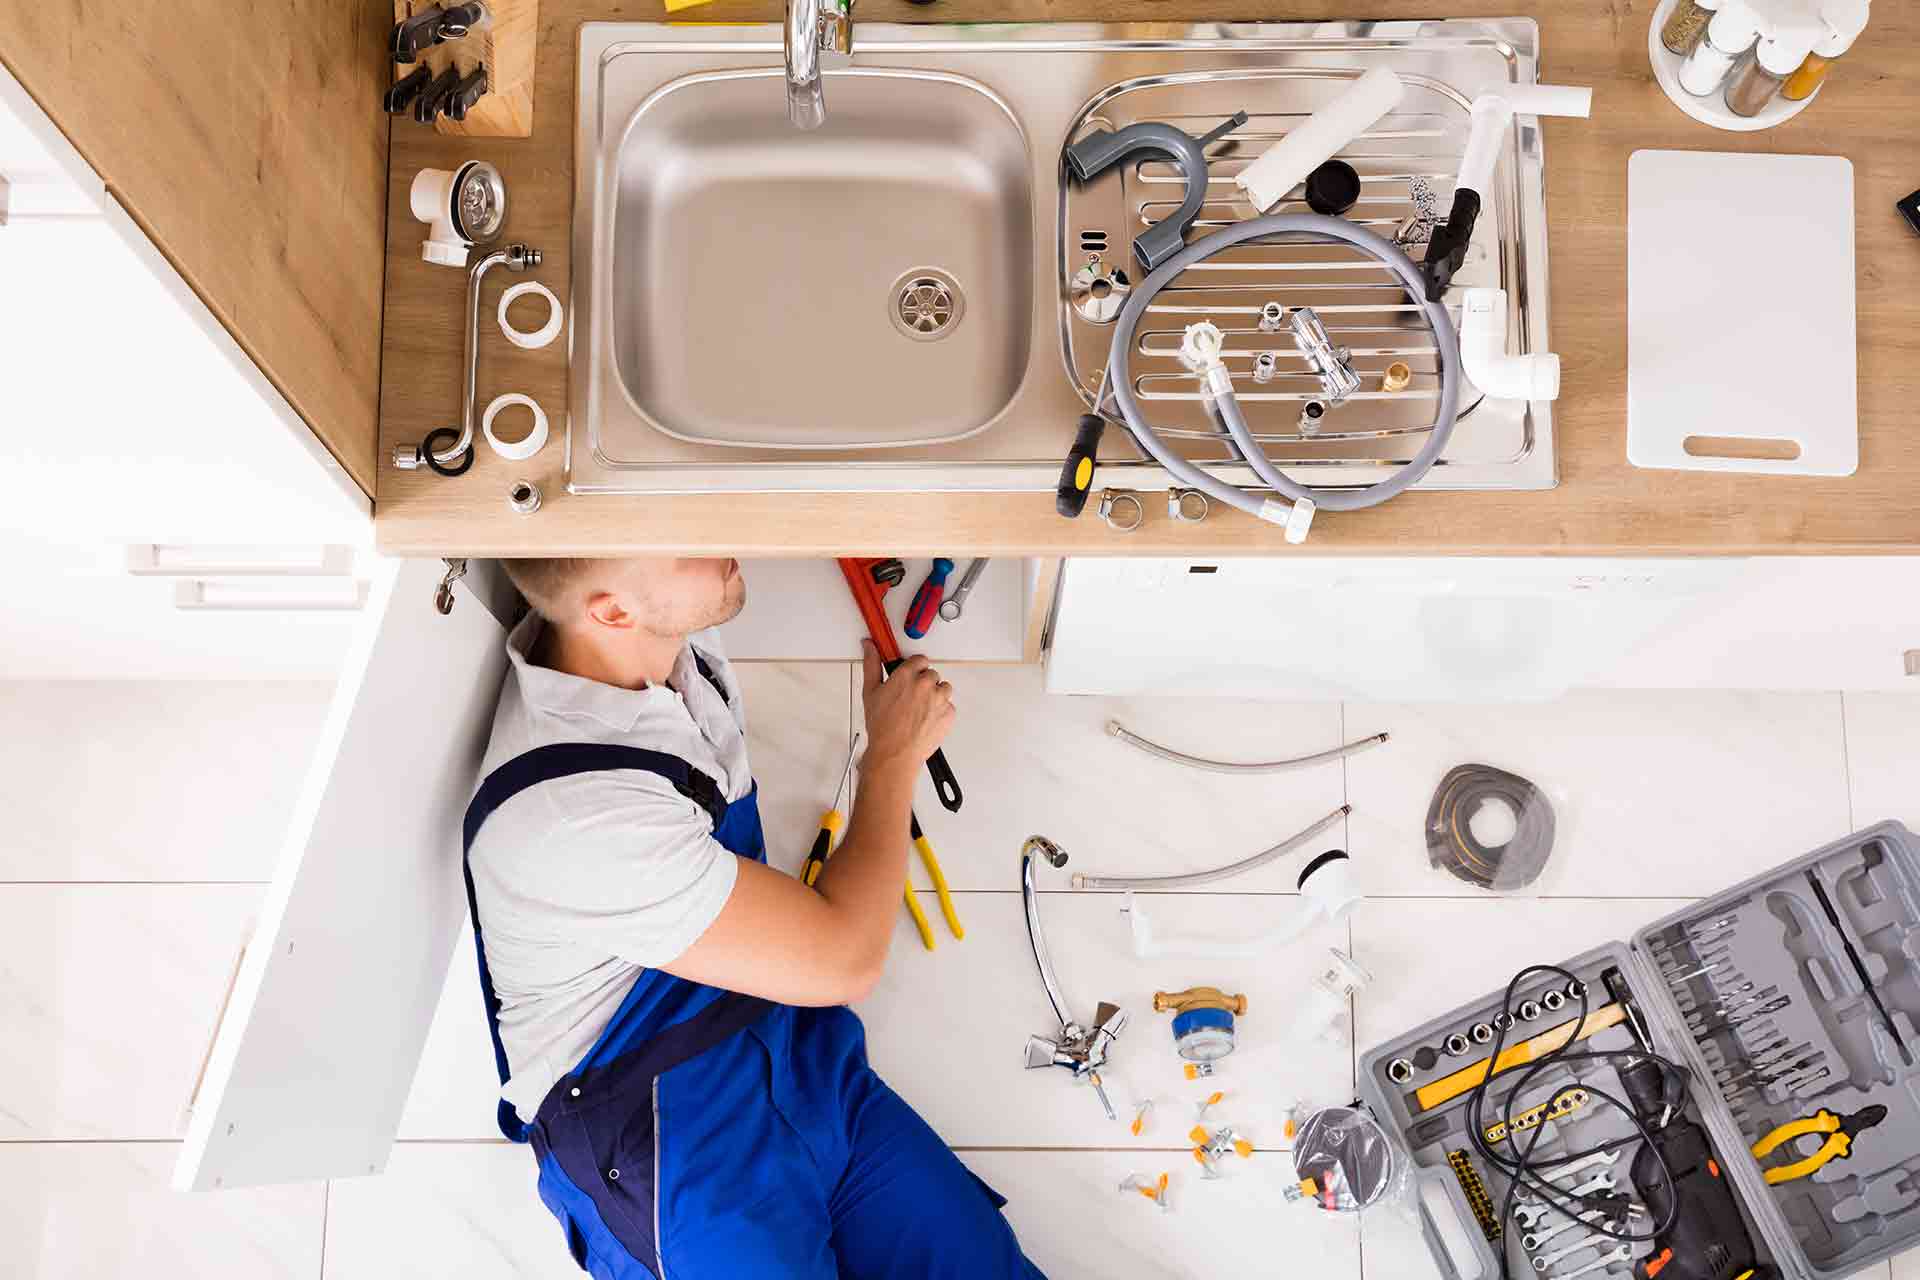 Cheltenham Emergency Plumber - A Sustainable Approach to Plumbing